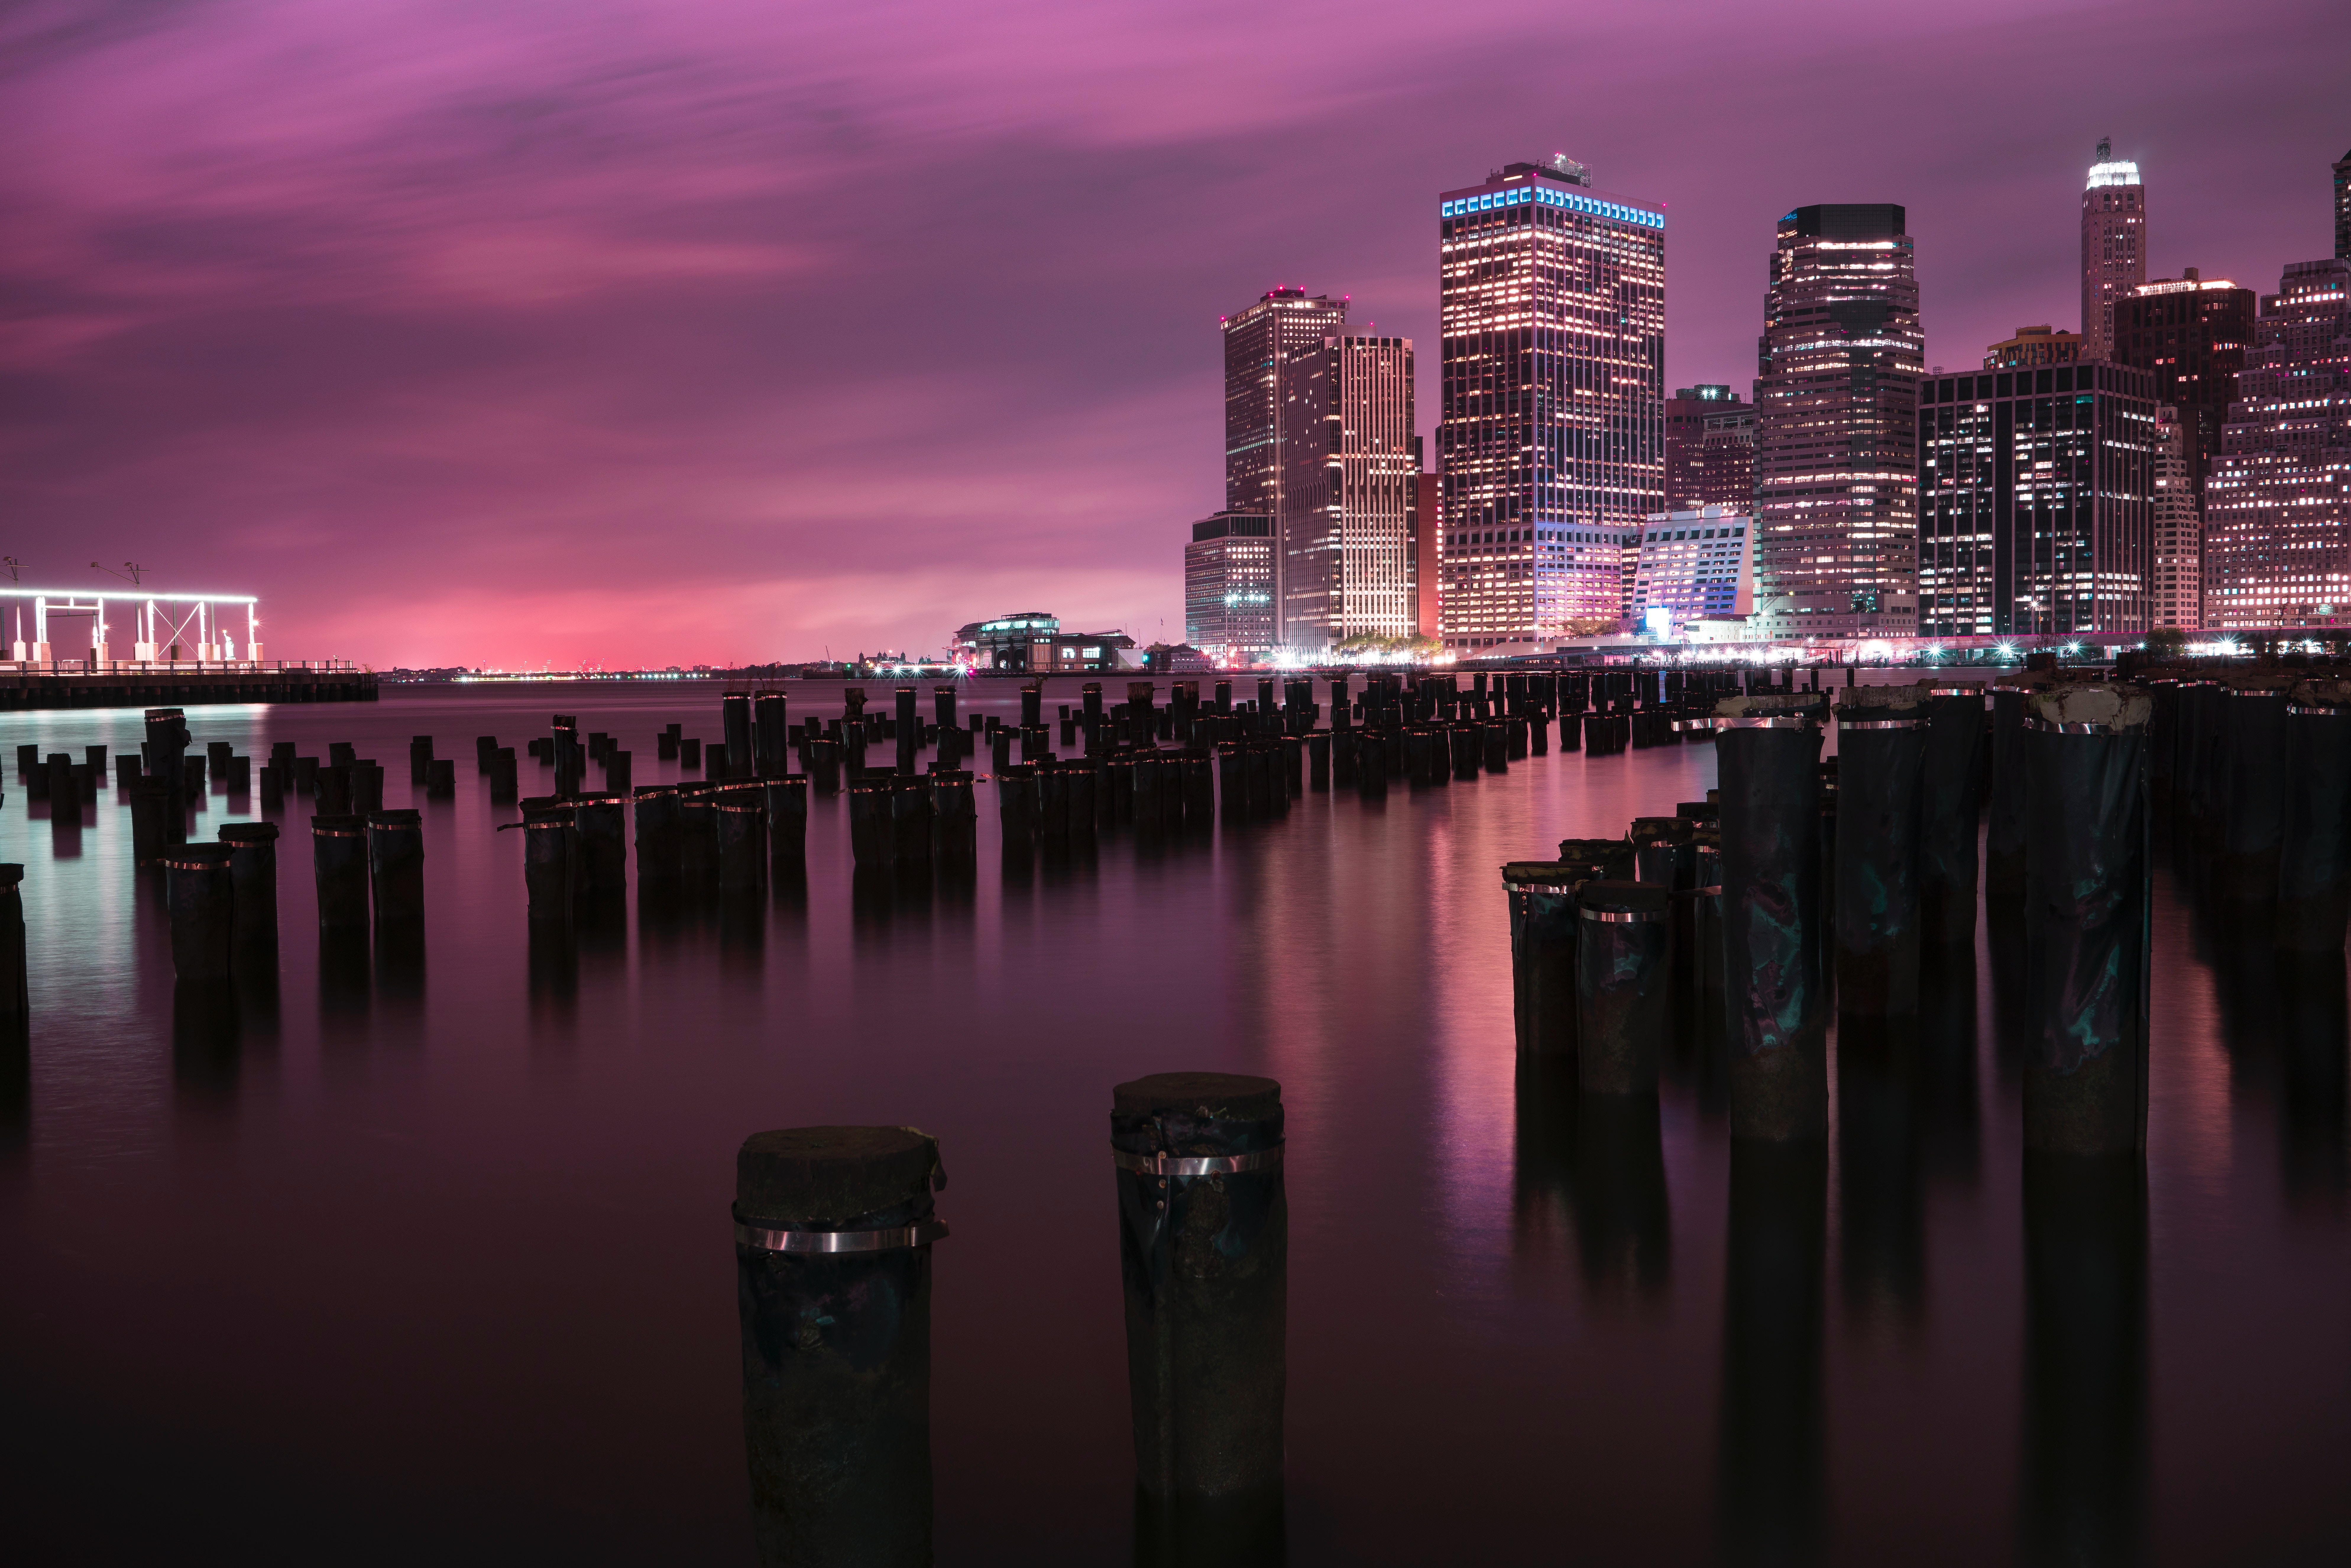 usa, cities, building, shore, bank, night city, city lights, united states